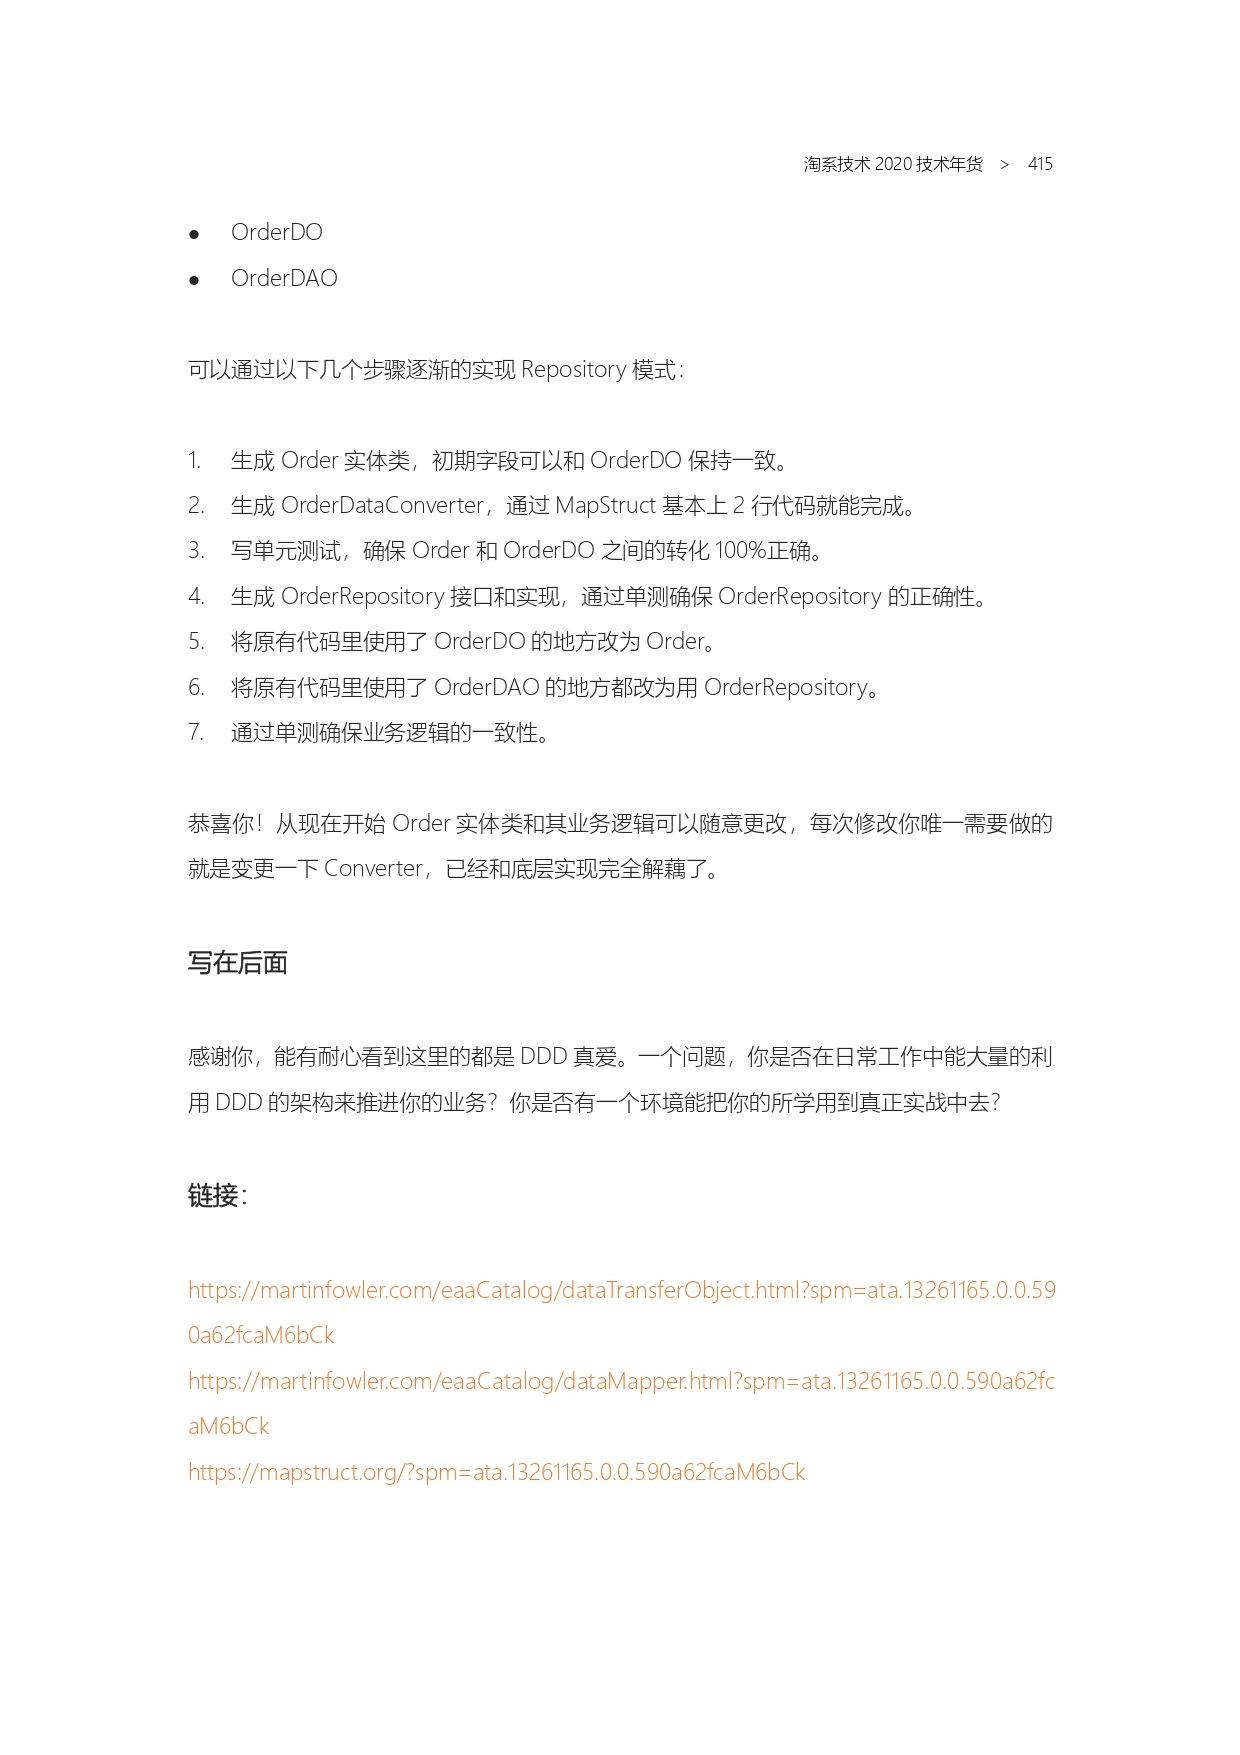 The Complete Works of Tao Technology 2020-1-570_page-0415.jpg